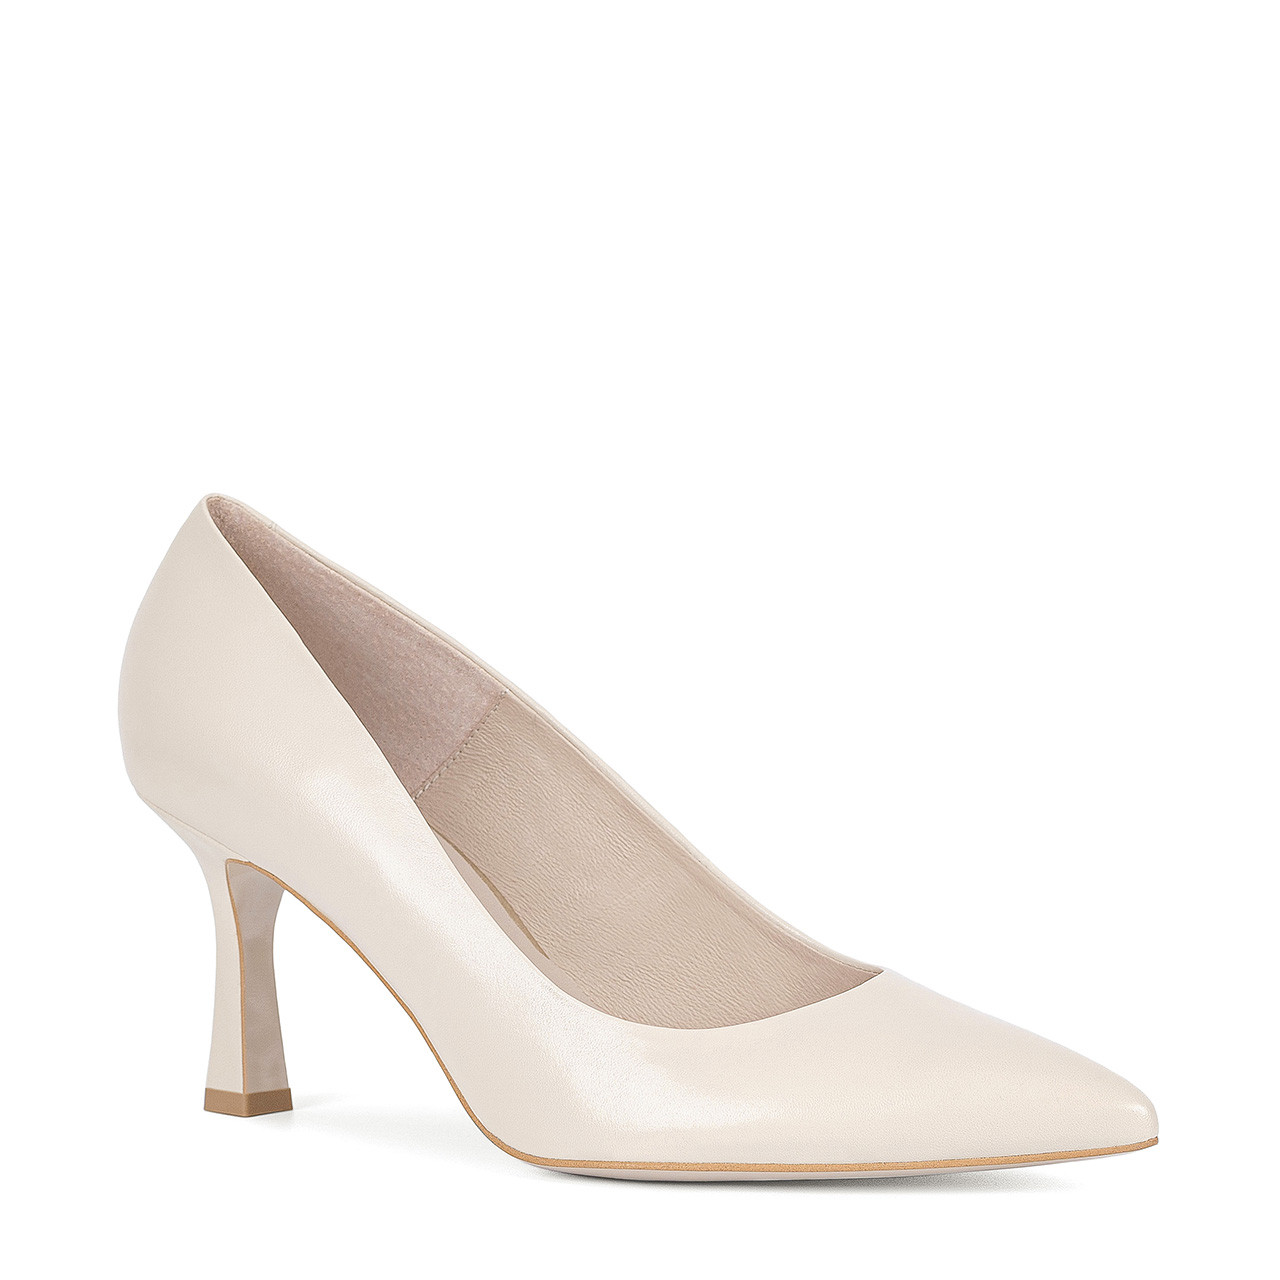 Classic beige cream women’s pumps with a geometric heel made of natural premium leather